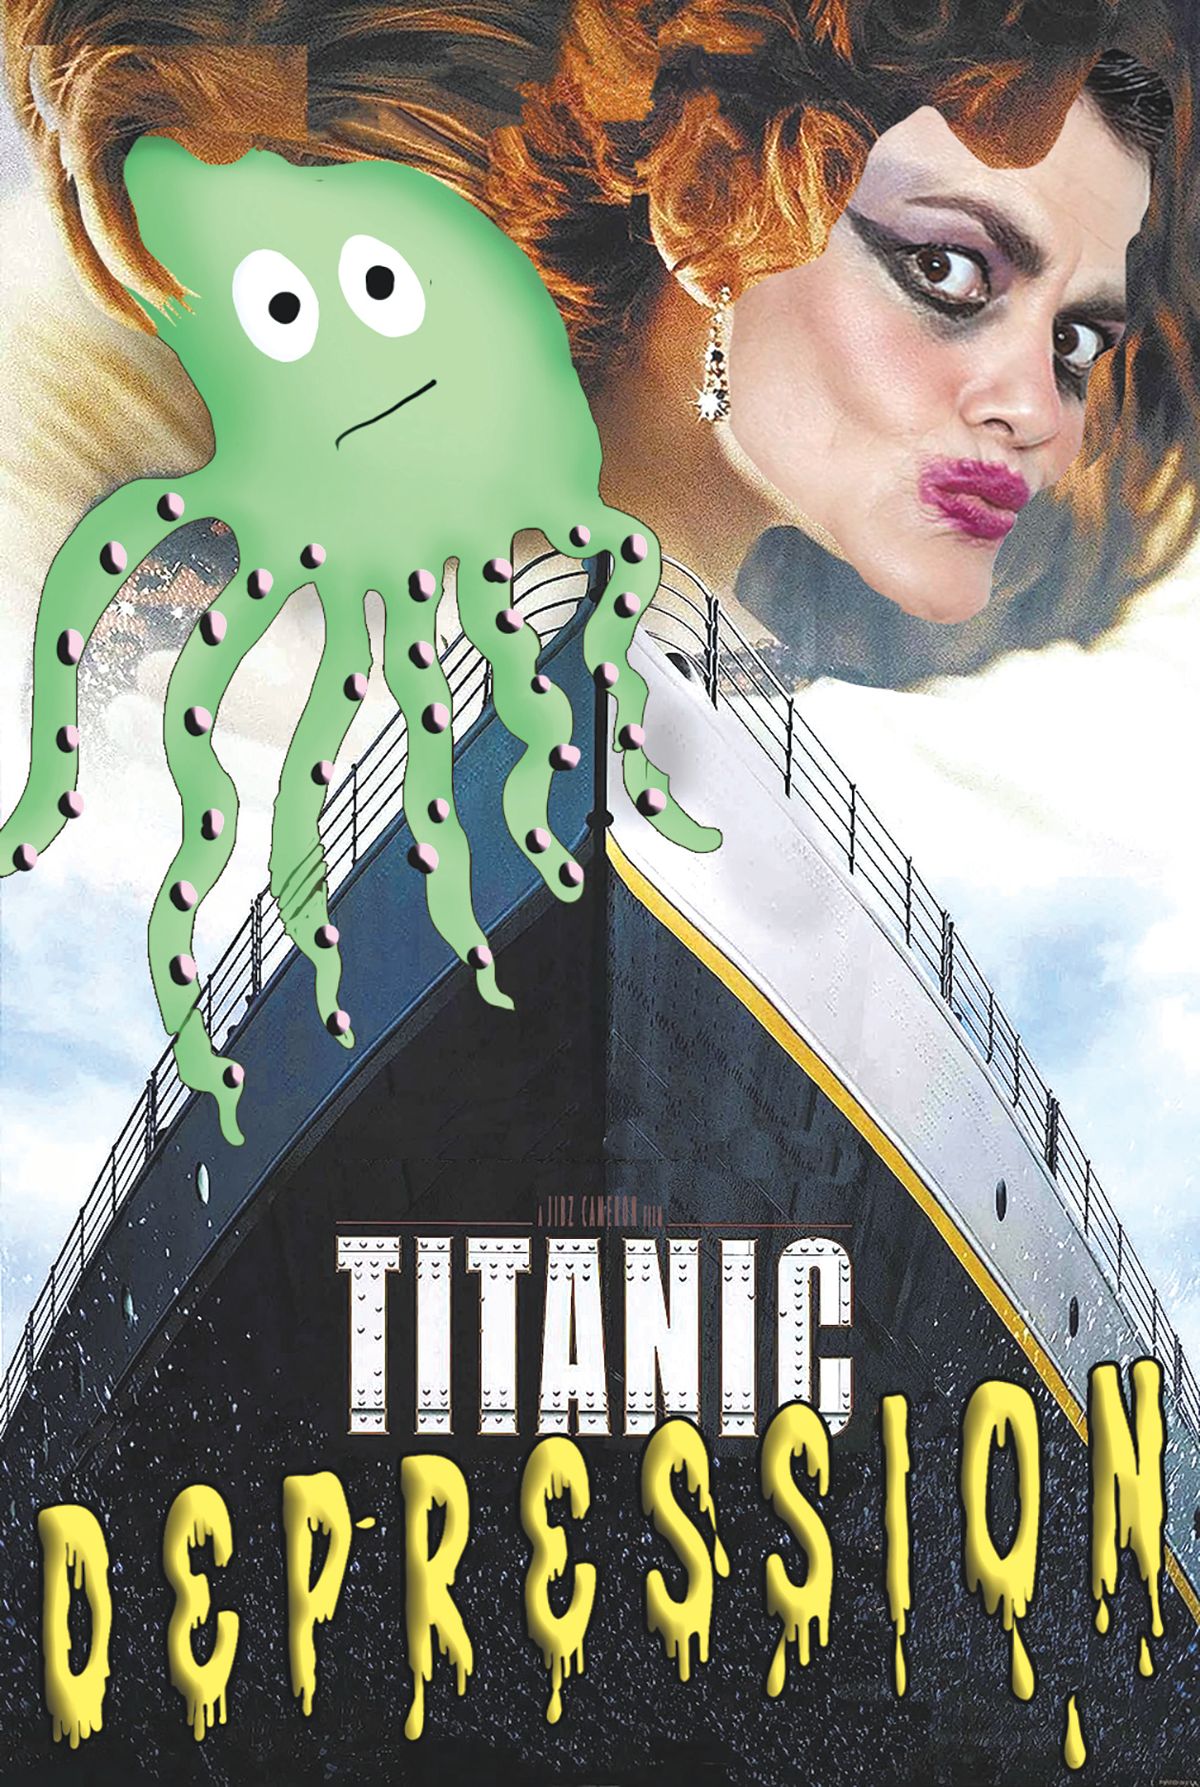 She’ll never let go: performance artist Dynasty Handbag’s Titanic Depression is an extensive and outrageous re-creation of James Cameron’s 1997 blockbuster

Courtesy the artist